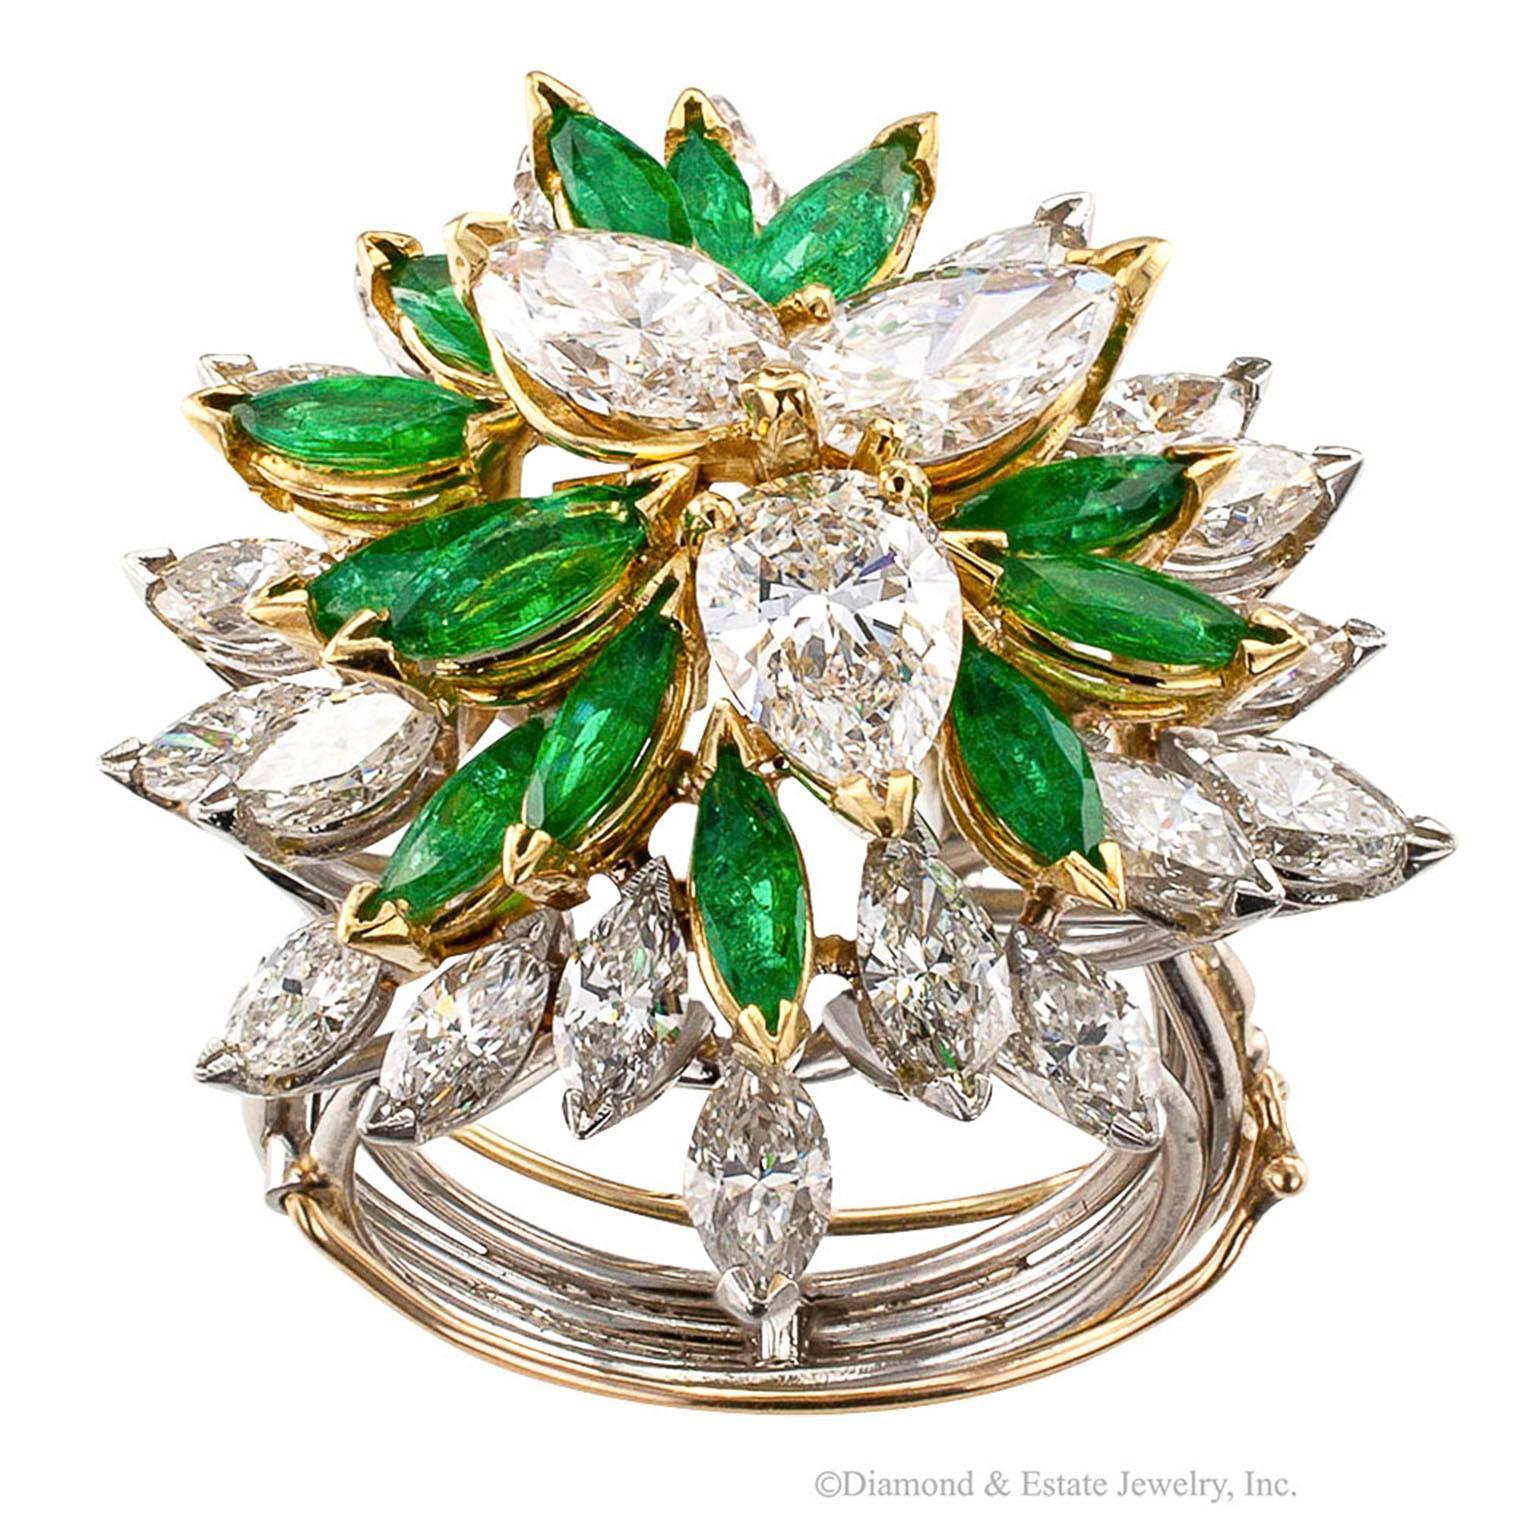 Handmade Emerald Diamond Cocktail Ring Platinum Gold

Handmade cocktail ring with 5.50 carats of diamonds and 2.50 carats of emeralds mounted in platinum and 18-karat gold.  The custom design centers upon a triangular motif fashioned from a trio of